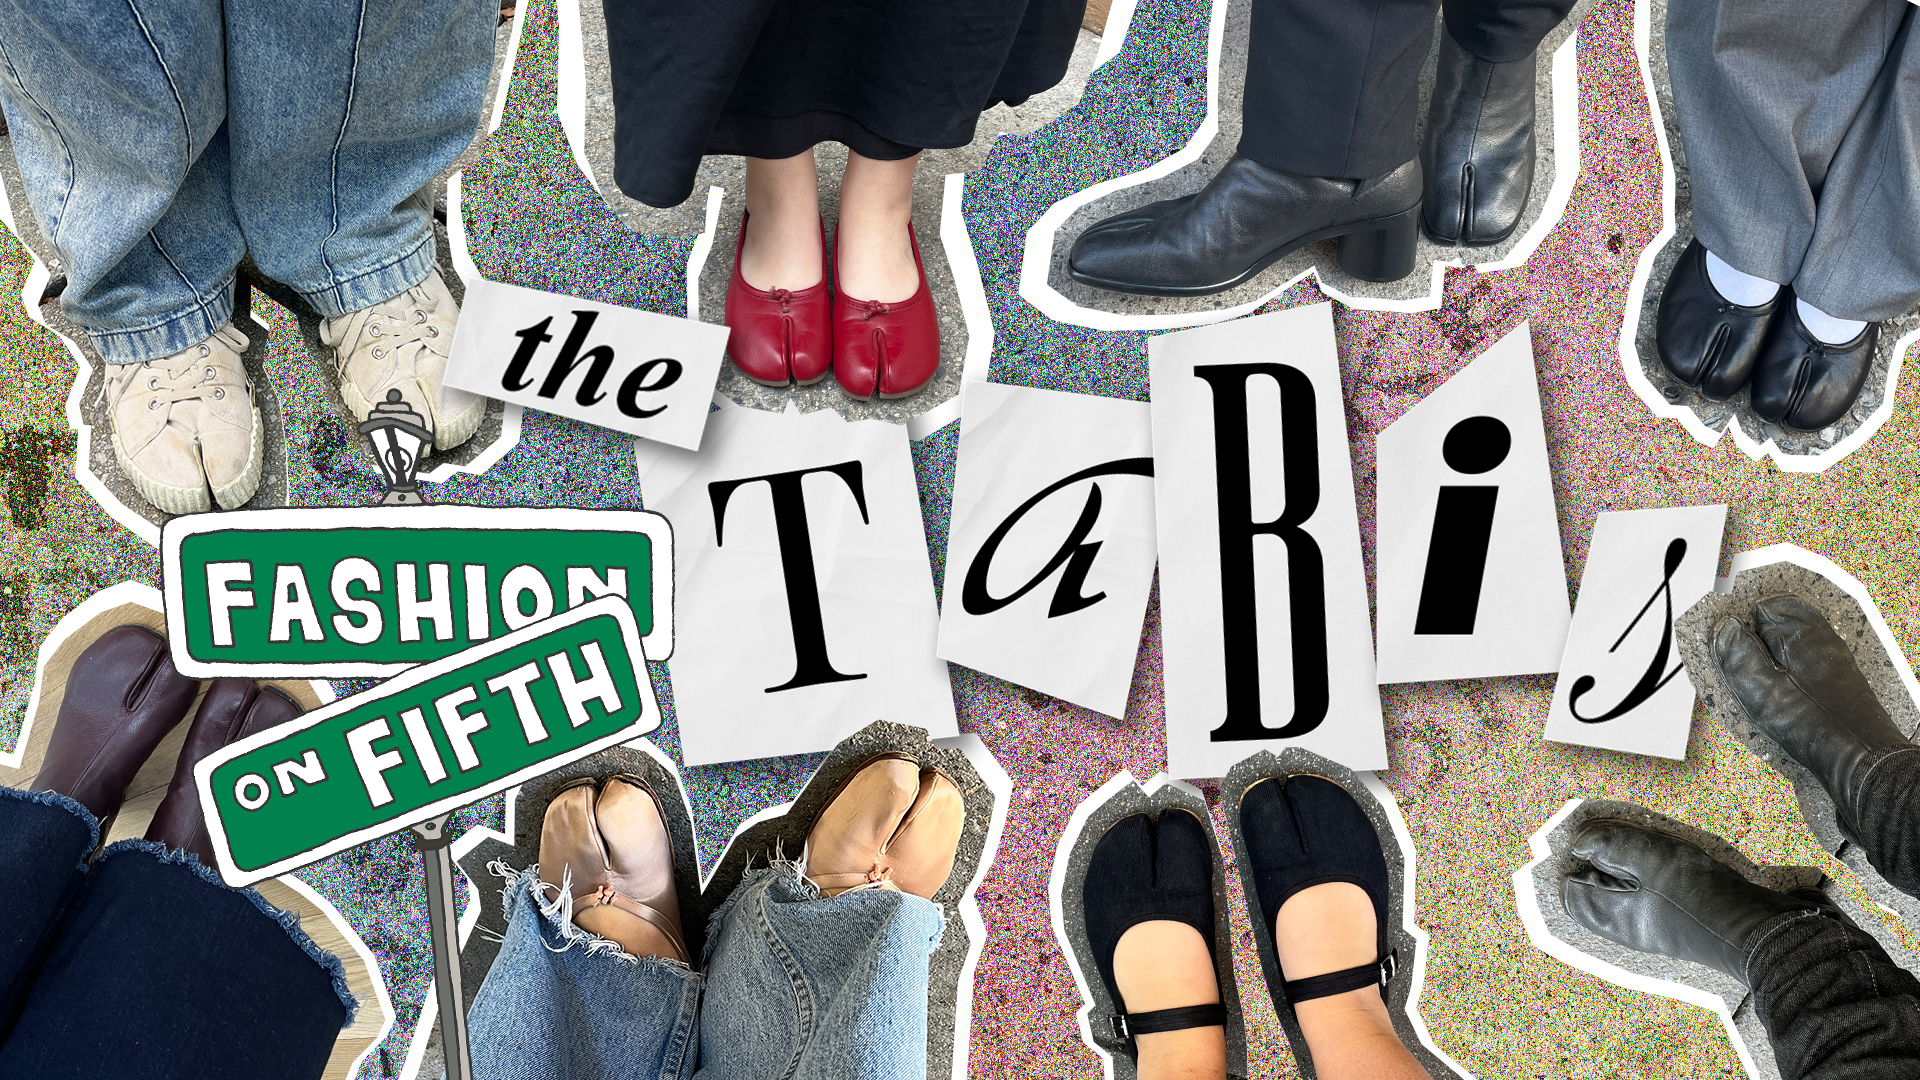 Eight variations of tabi shoes around black-and-white letter cutouts that spell “tabi.” Fashion on Fifth street sign logo in left corner.